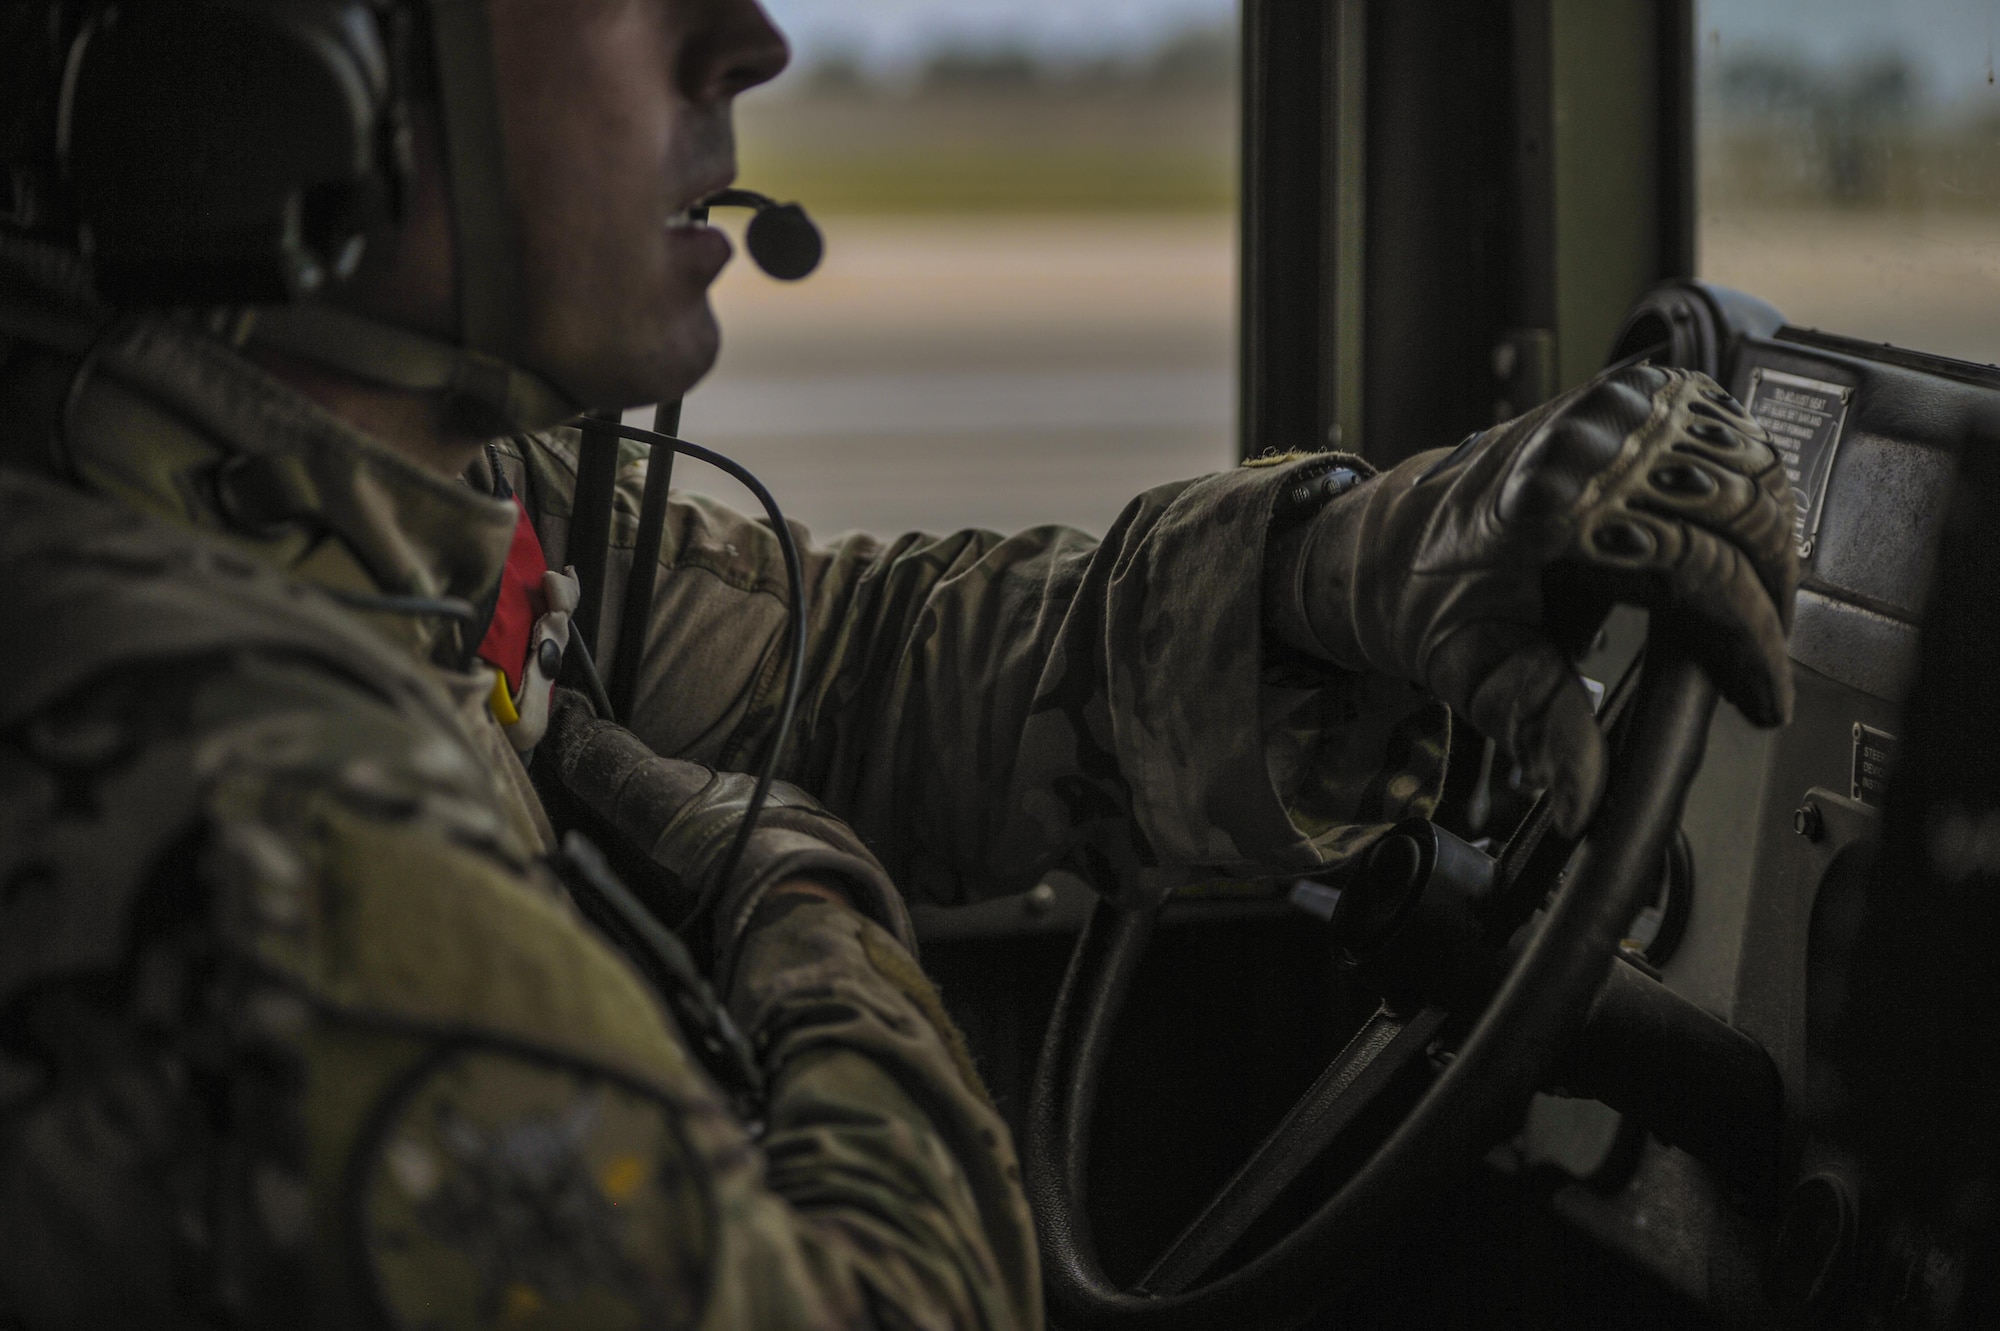 A U.S. Air Force combat controller assigned to the 1st Special Operations Squadron, drives a Humvee while using his radio to communicate at Kunsan Air Base, Republic of Korea, Oct. 22, 2016. Members from the 320th STS and 1st SOS worked with the ROK 255th SOS to enhance U.S. and ROK Air Force Special Operations Forces' capabilities. They conducted infiltration methods, jump clearing team operations, airfield establishment, aircraft control and close air support familiarization. (U.S. Air Force photo by Senior Airman Colville McFee/Released)